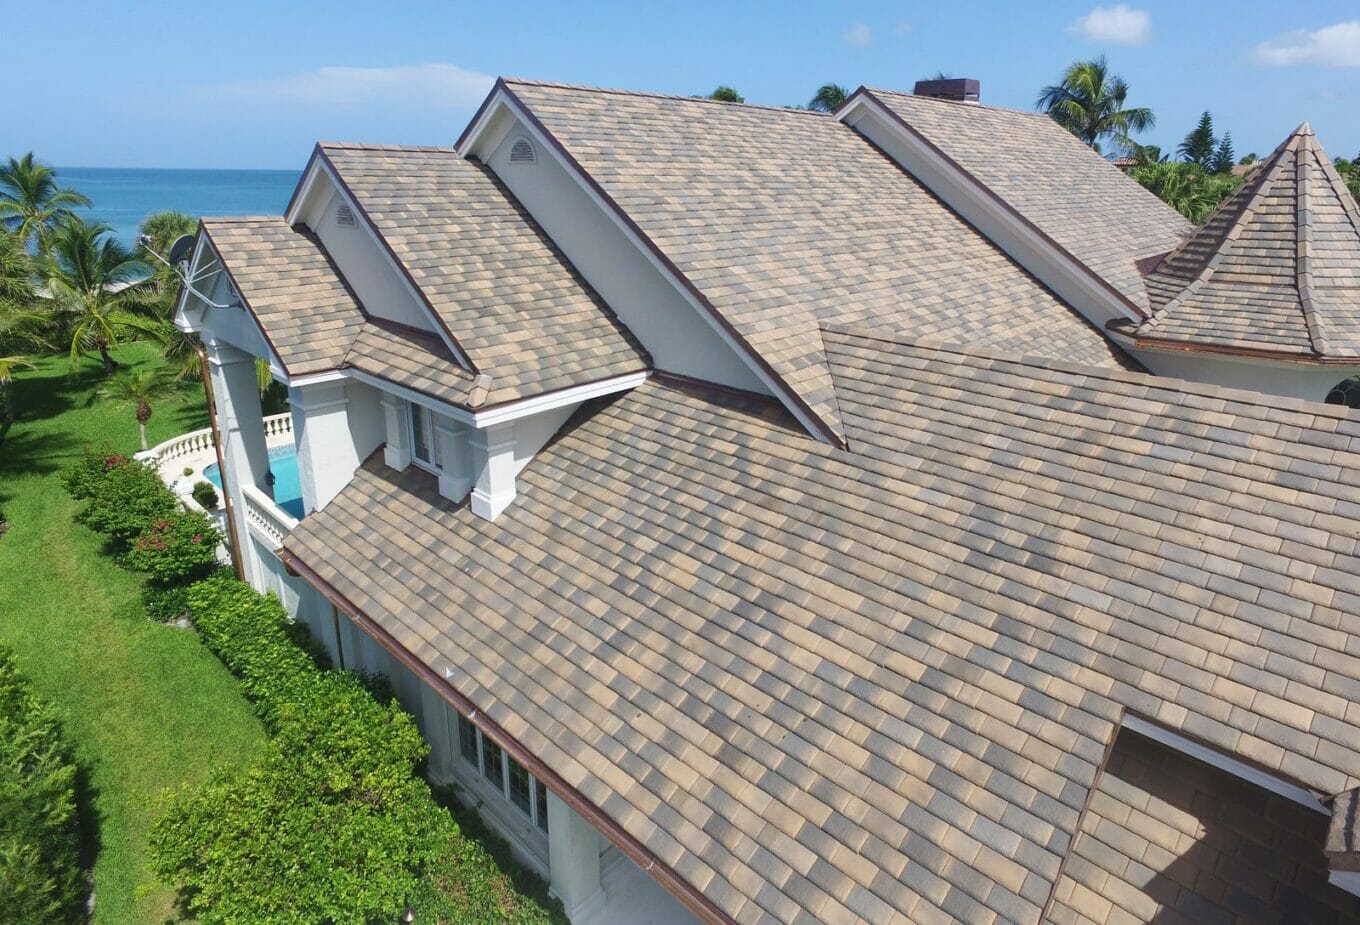 House with Ludowici Slate Tile Roof